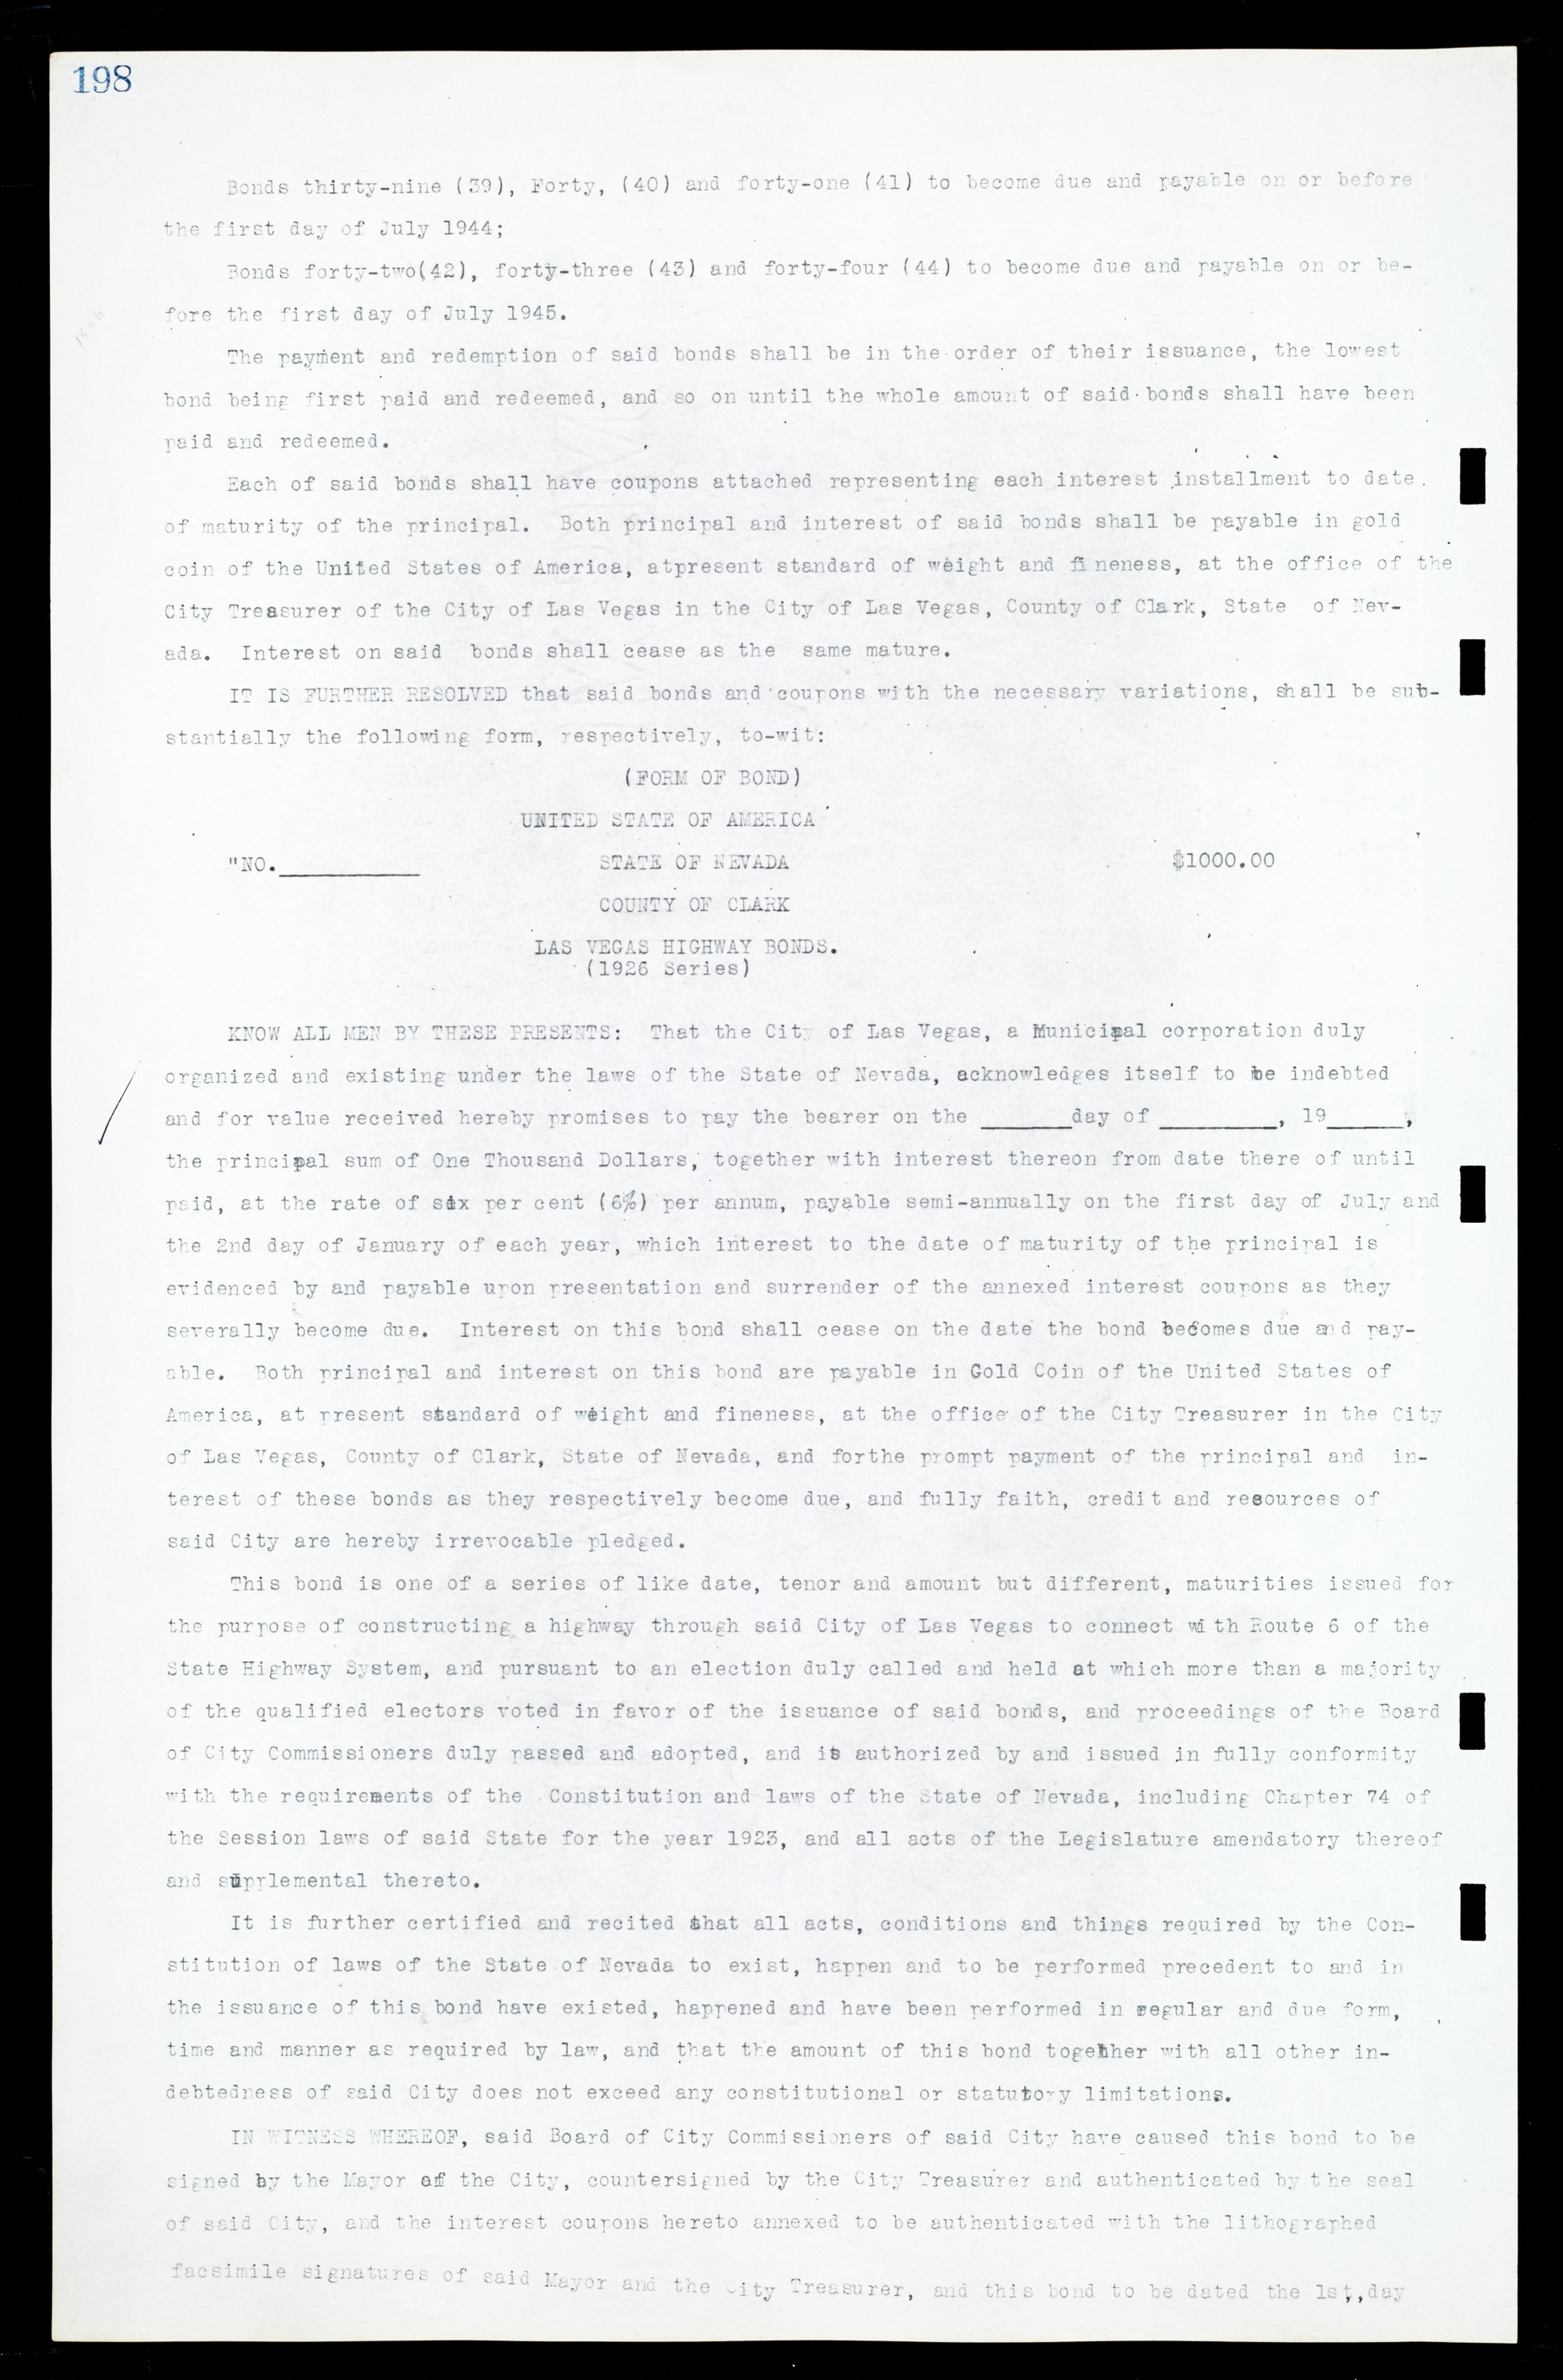 Las Vegas City Commission Minutes, March 1, 1922 to May 10, 1929, lvc000002-205